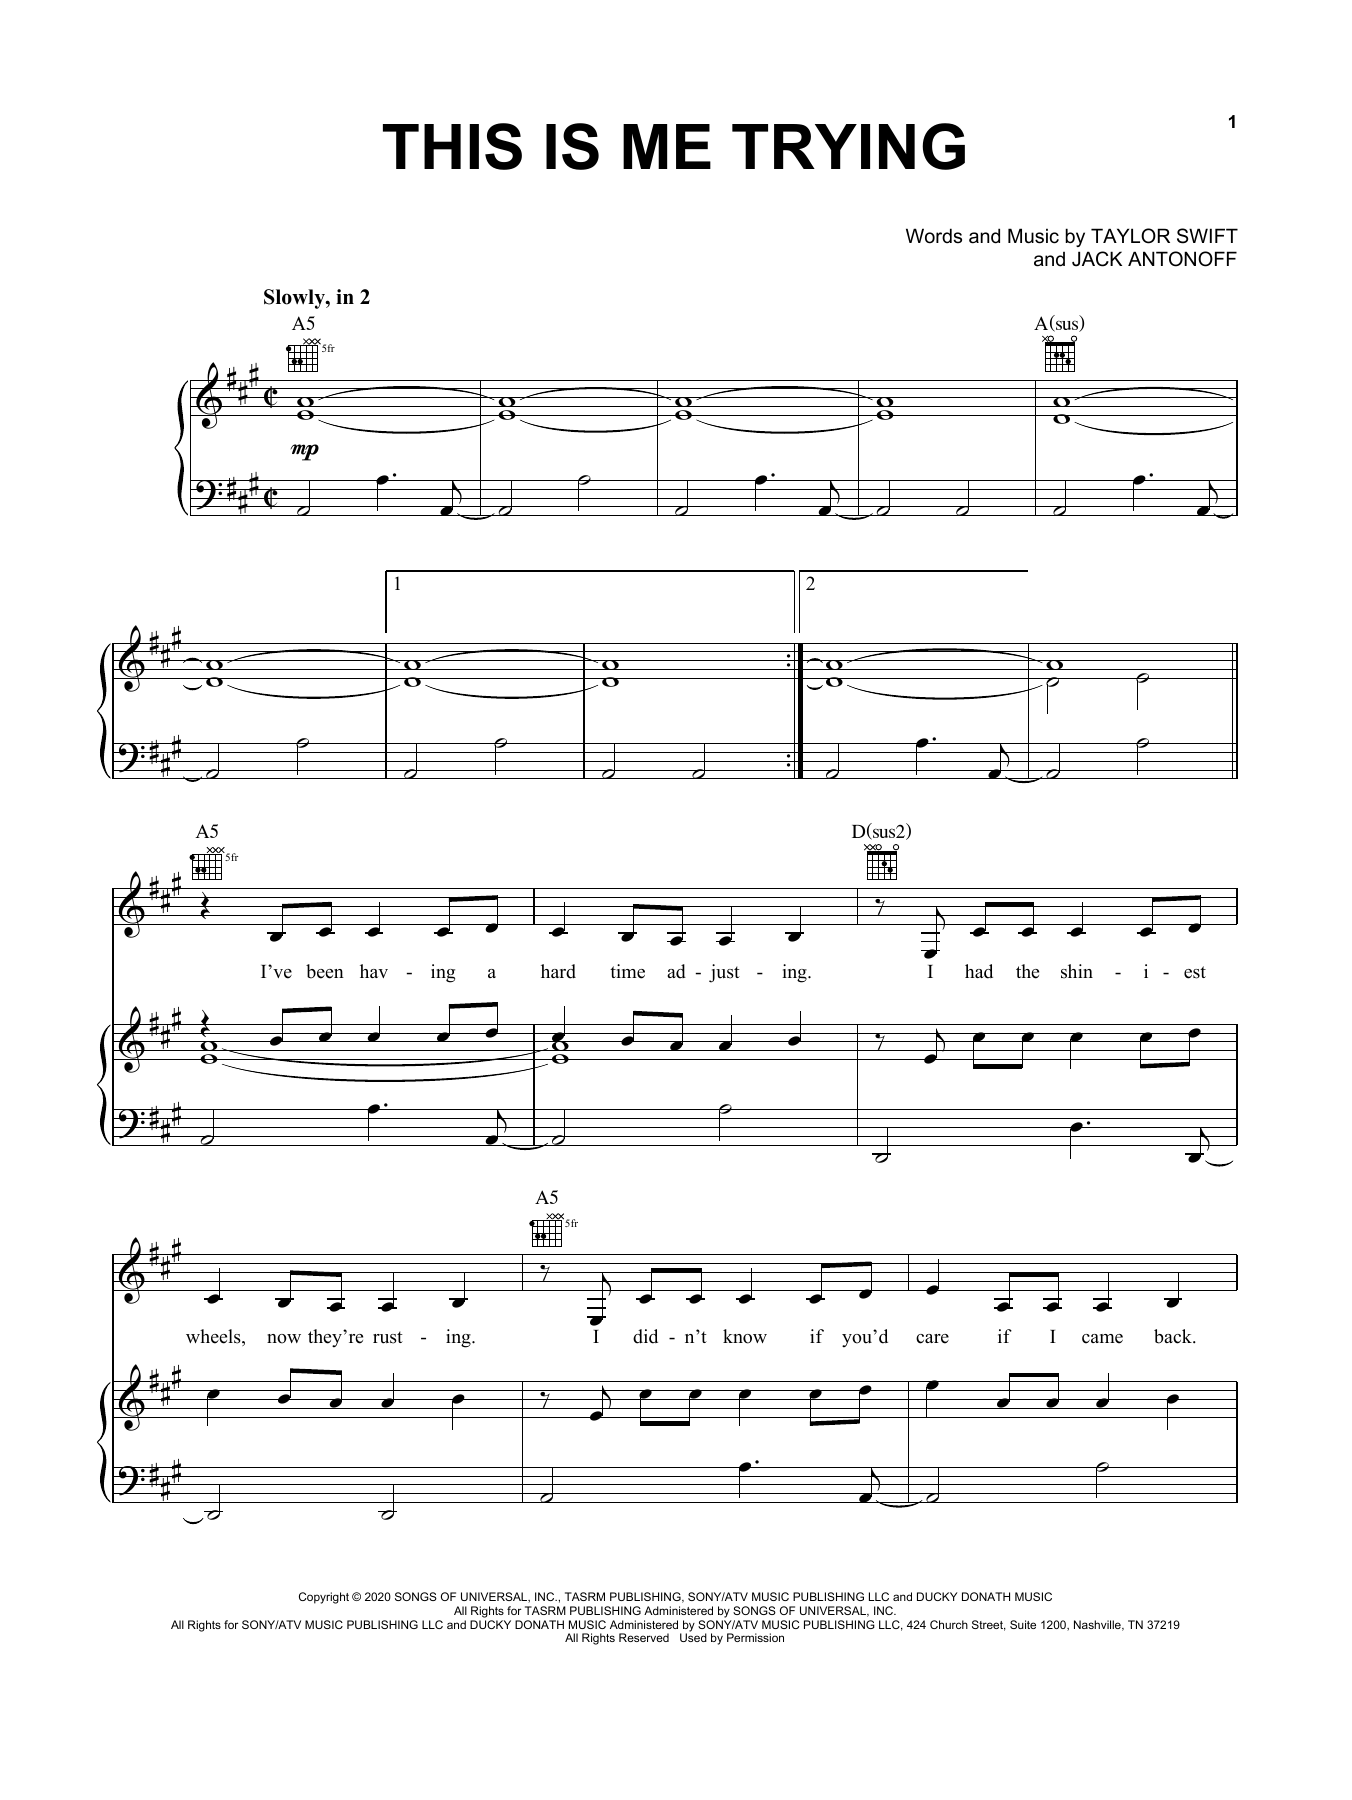 Download Taylor Swift this is me trying Sheet Music